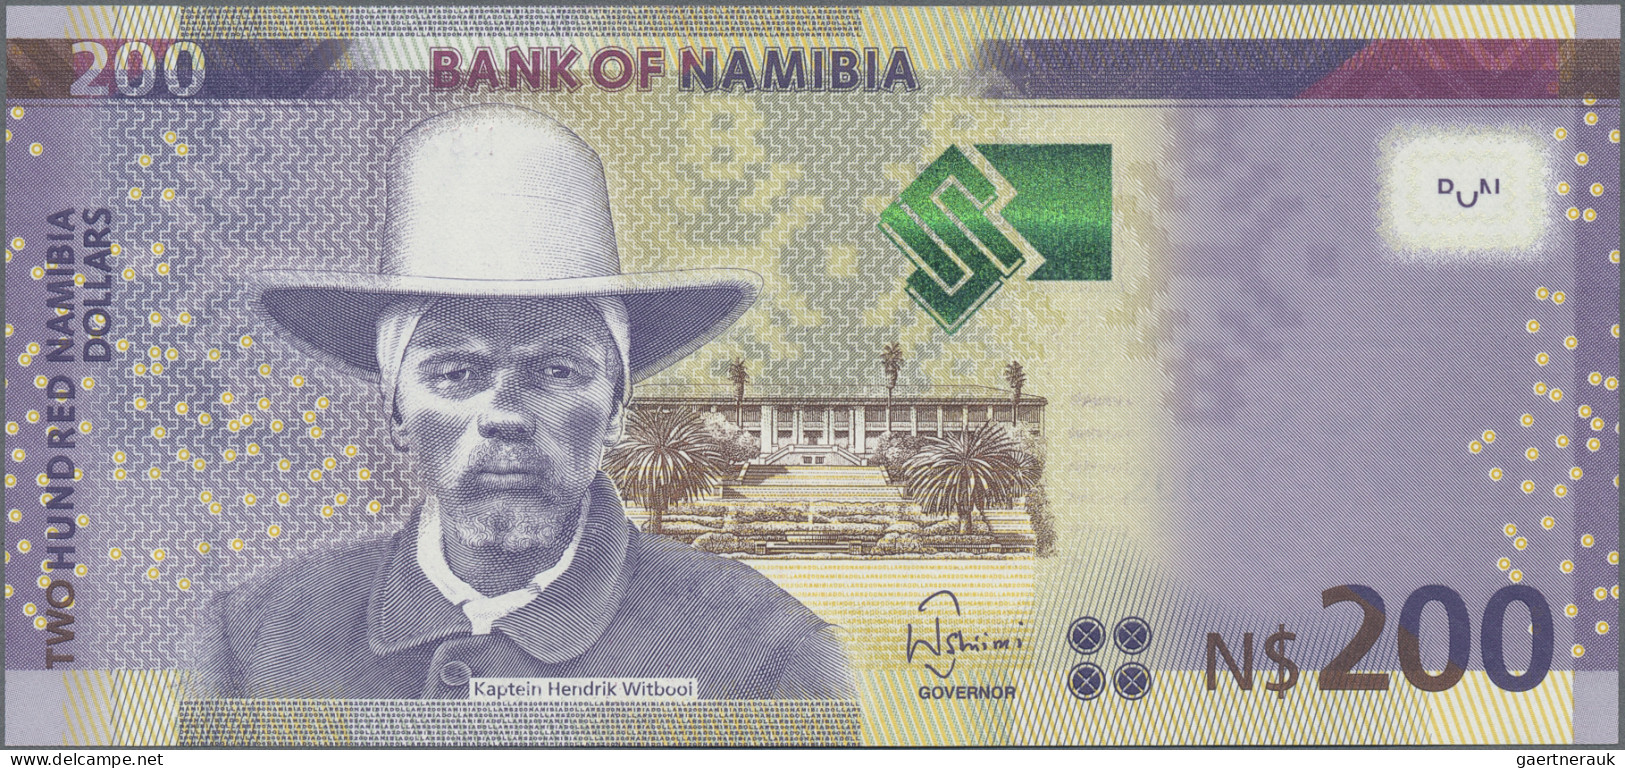 Namibia: Bank of Namibia, lot with 5 banknotes, 2012 series, with 10, 20, 50, 10